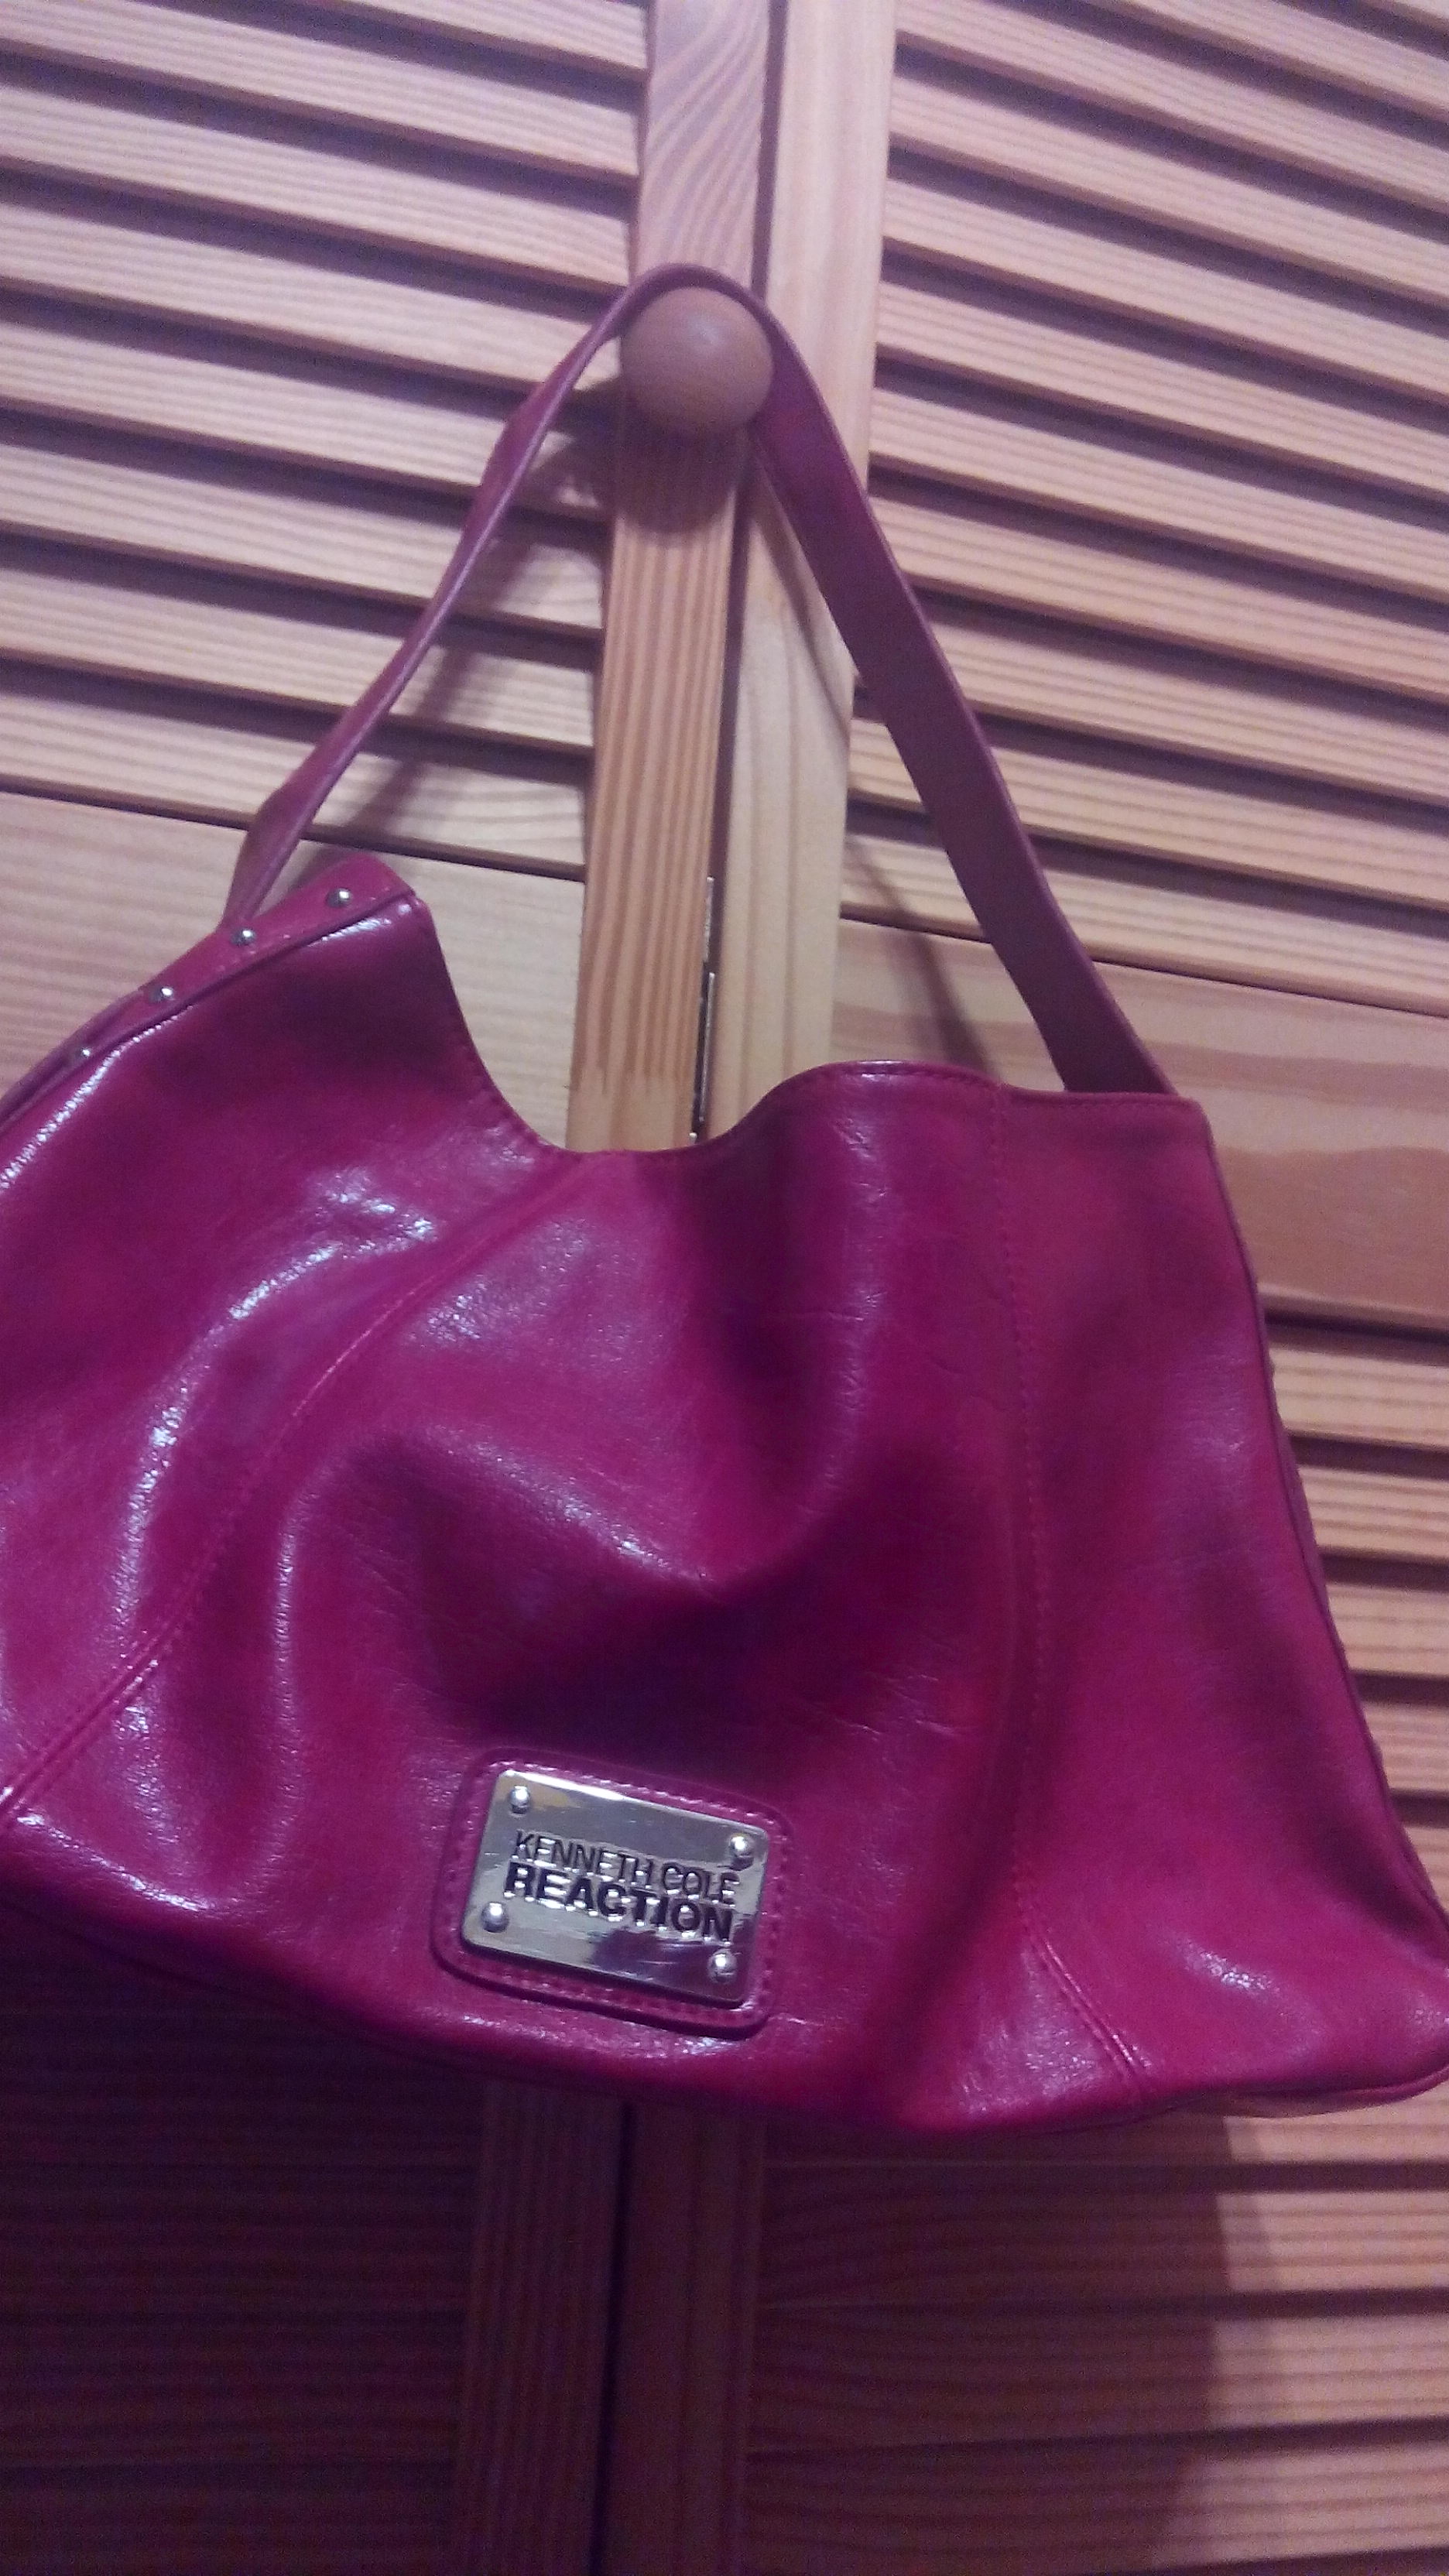 Pink Kenneth Cole Reaction purse